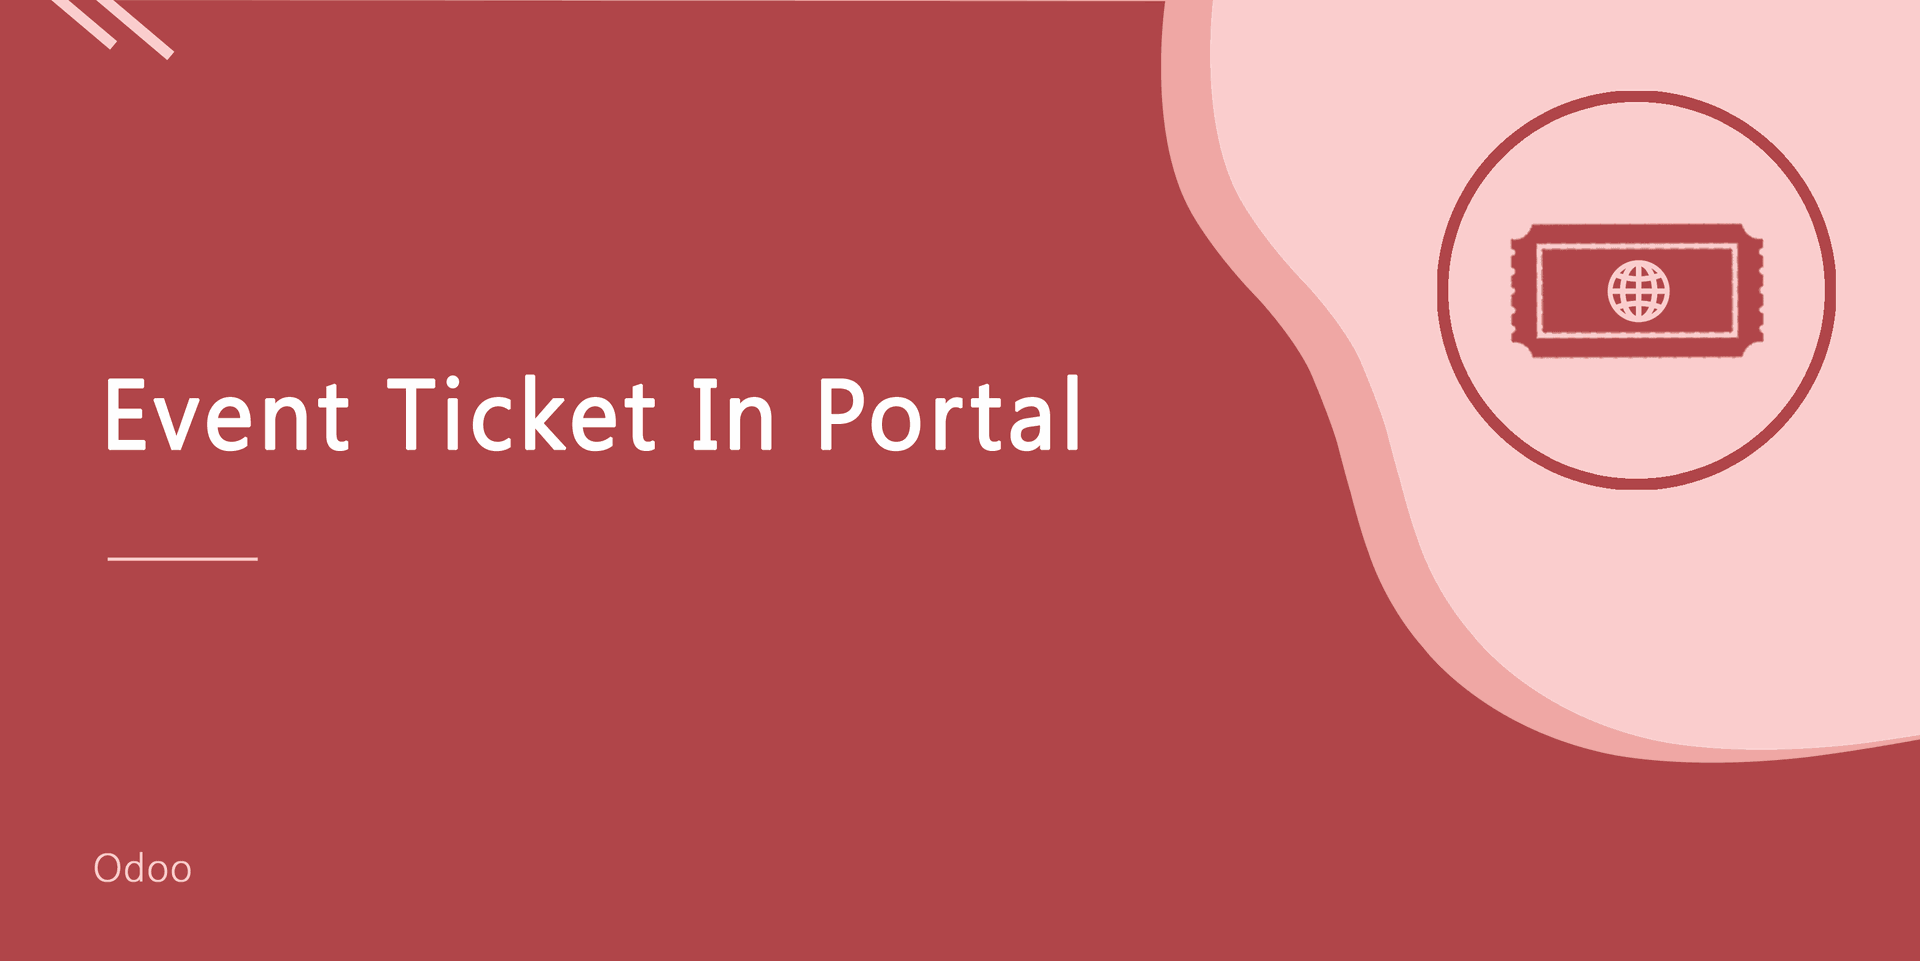 Event Ticket In Portal
